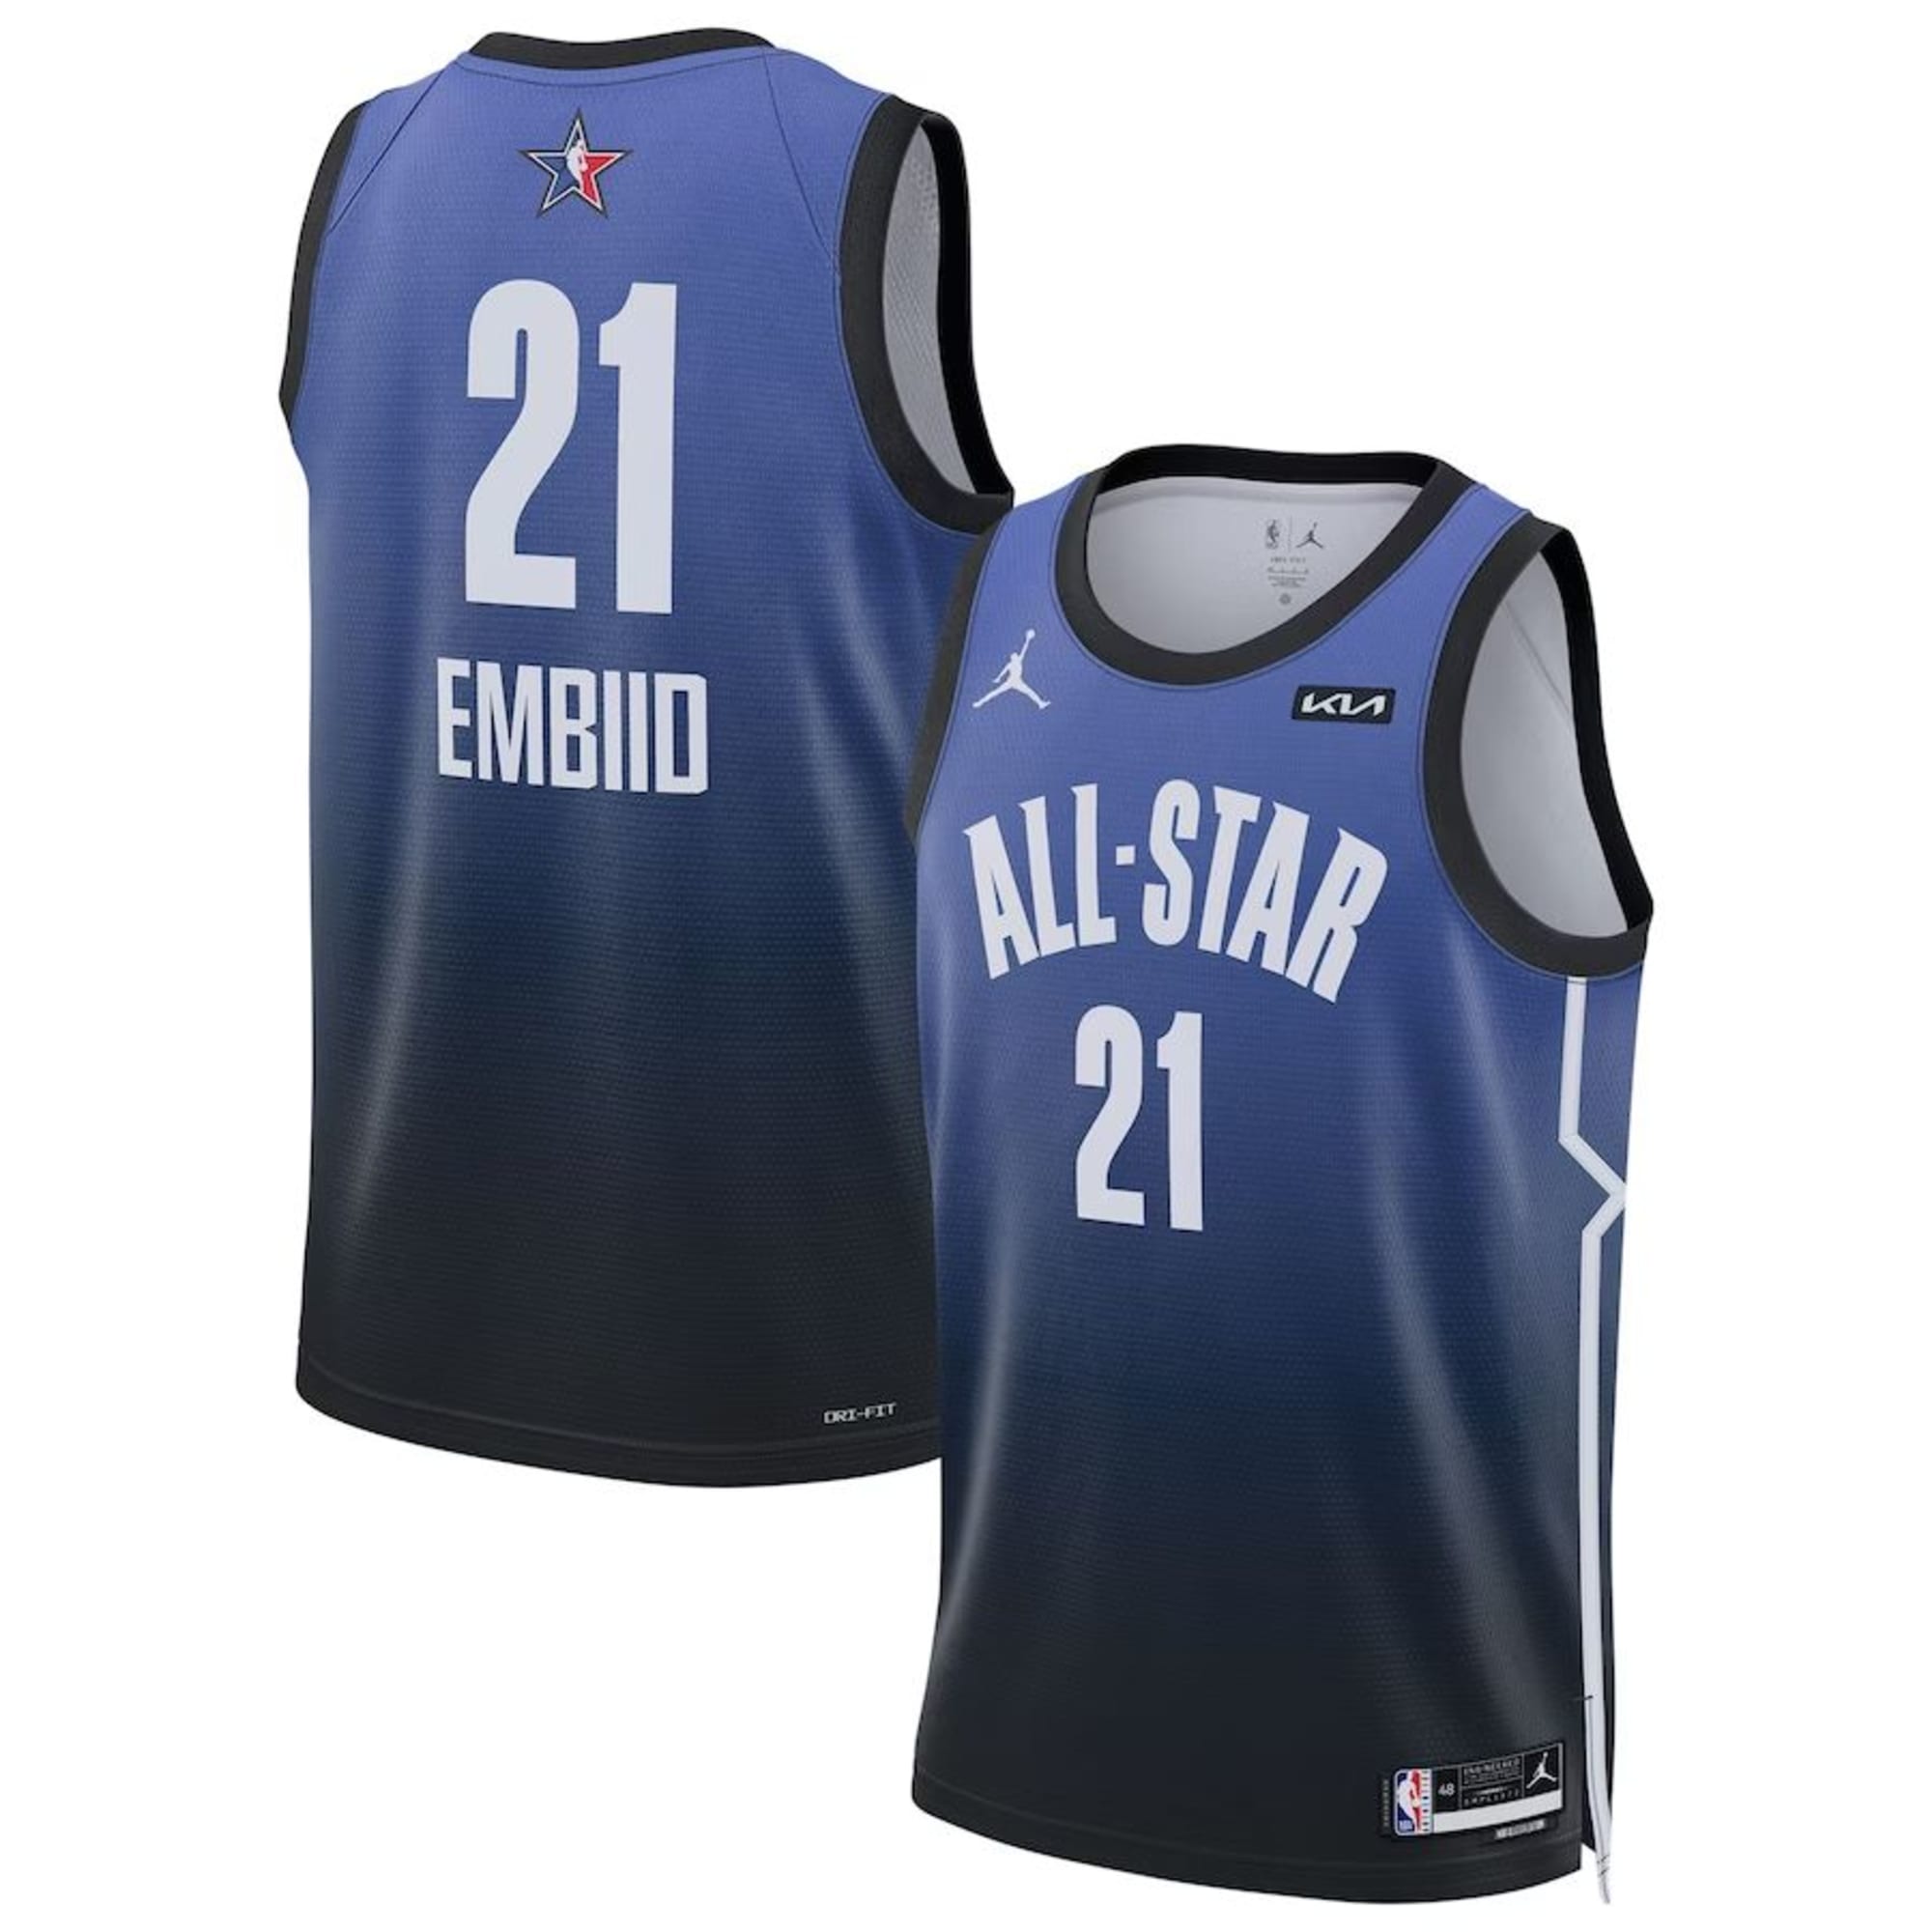 Order your 2023 Joel Embiid All-Star merchandise today